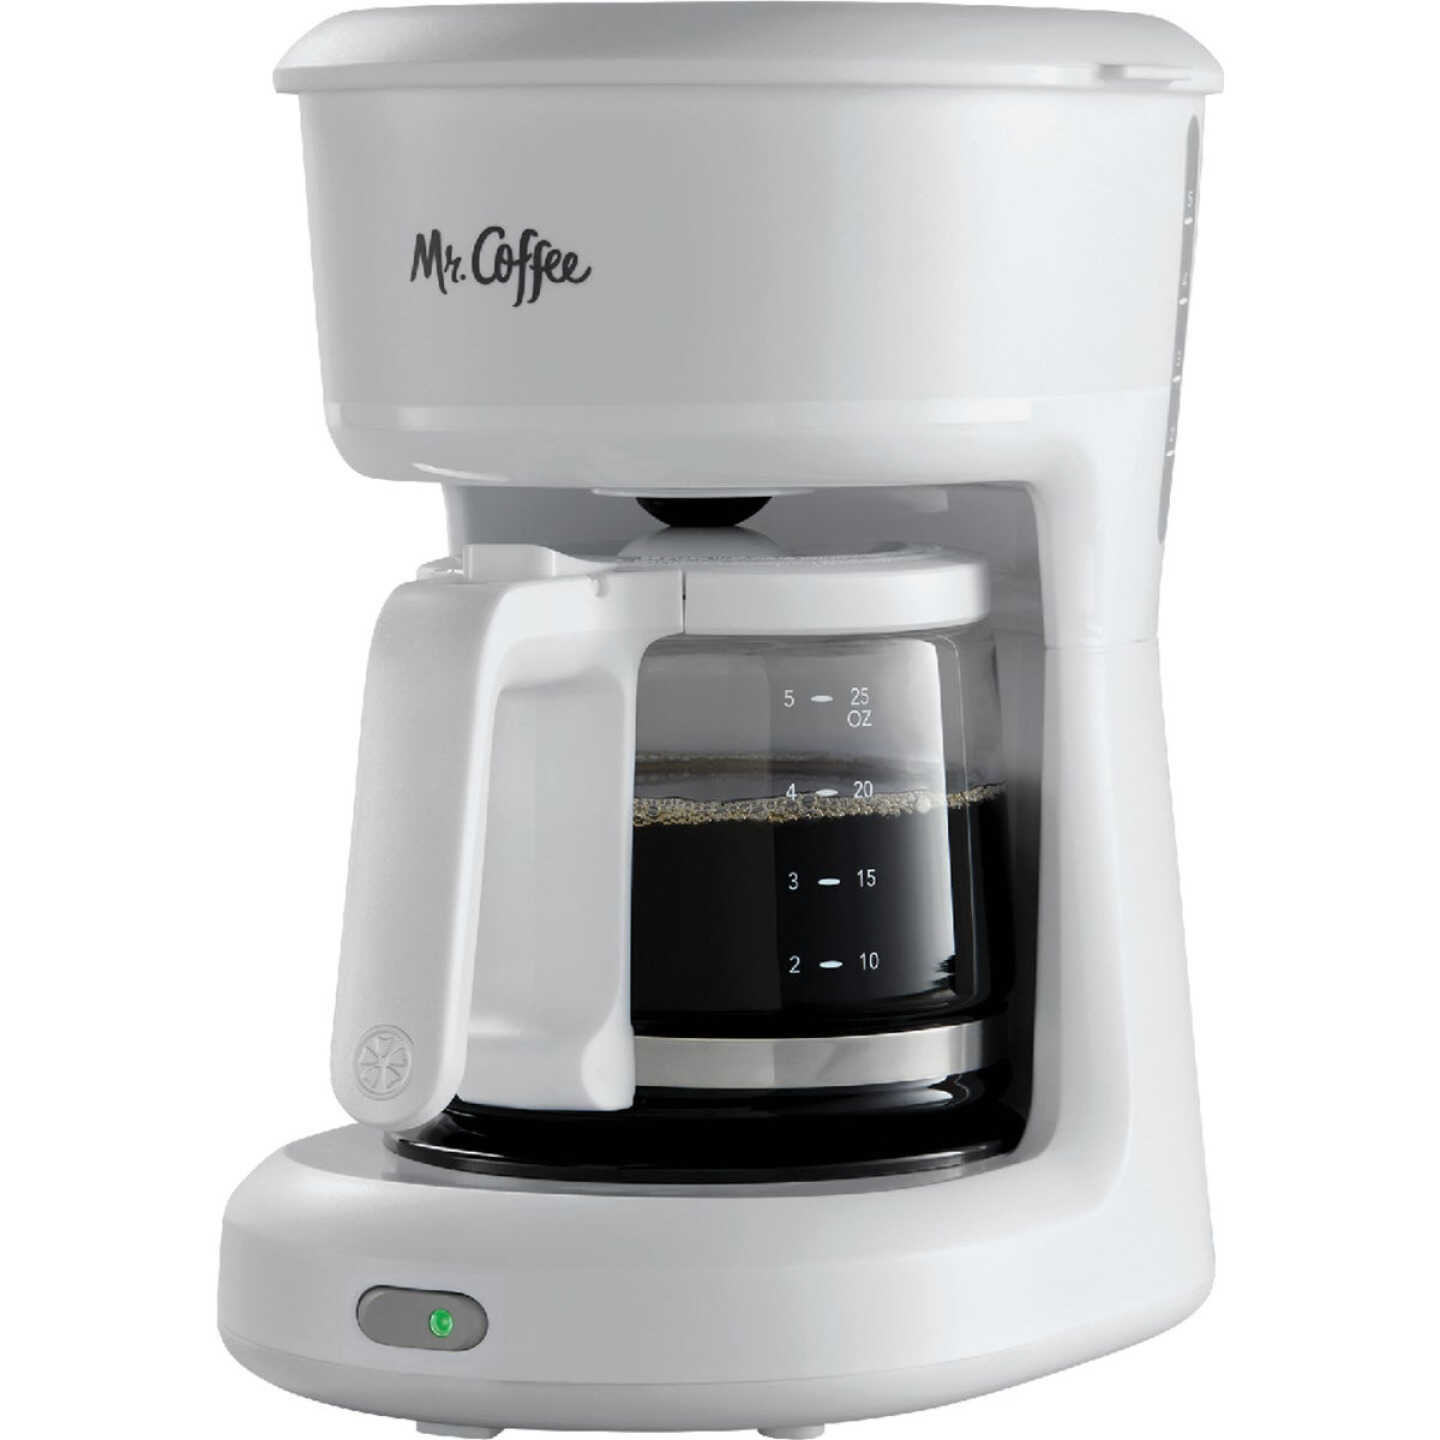 DETAILED Review Mr Coffee 5 Cup MINI Brew Programmable Coffeemaker